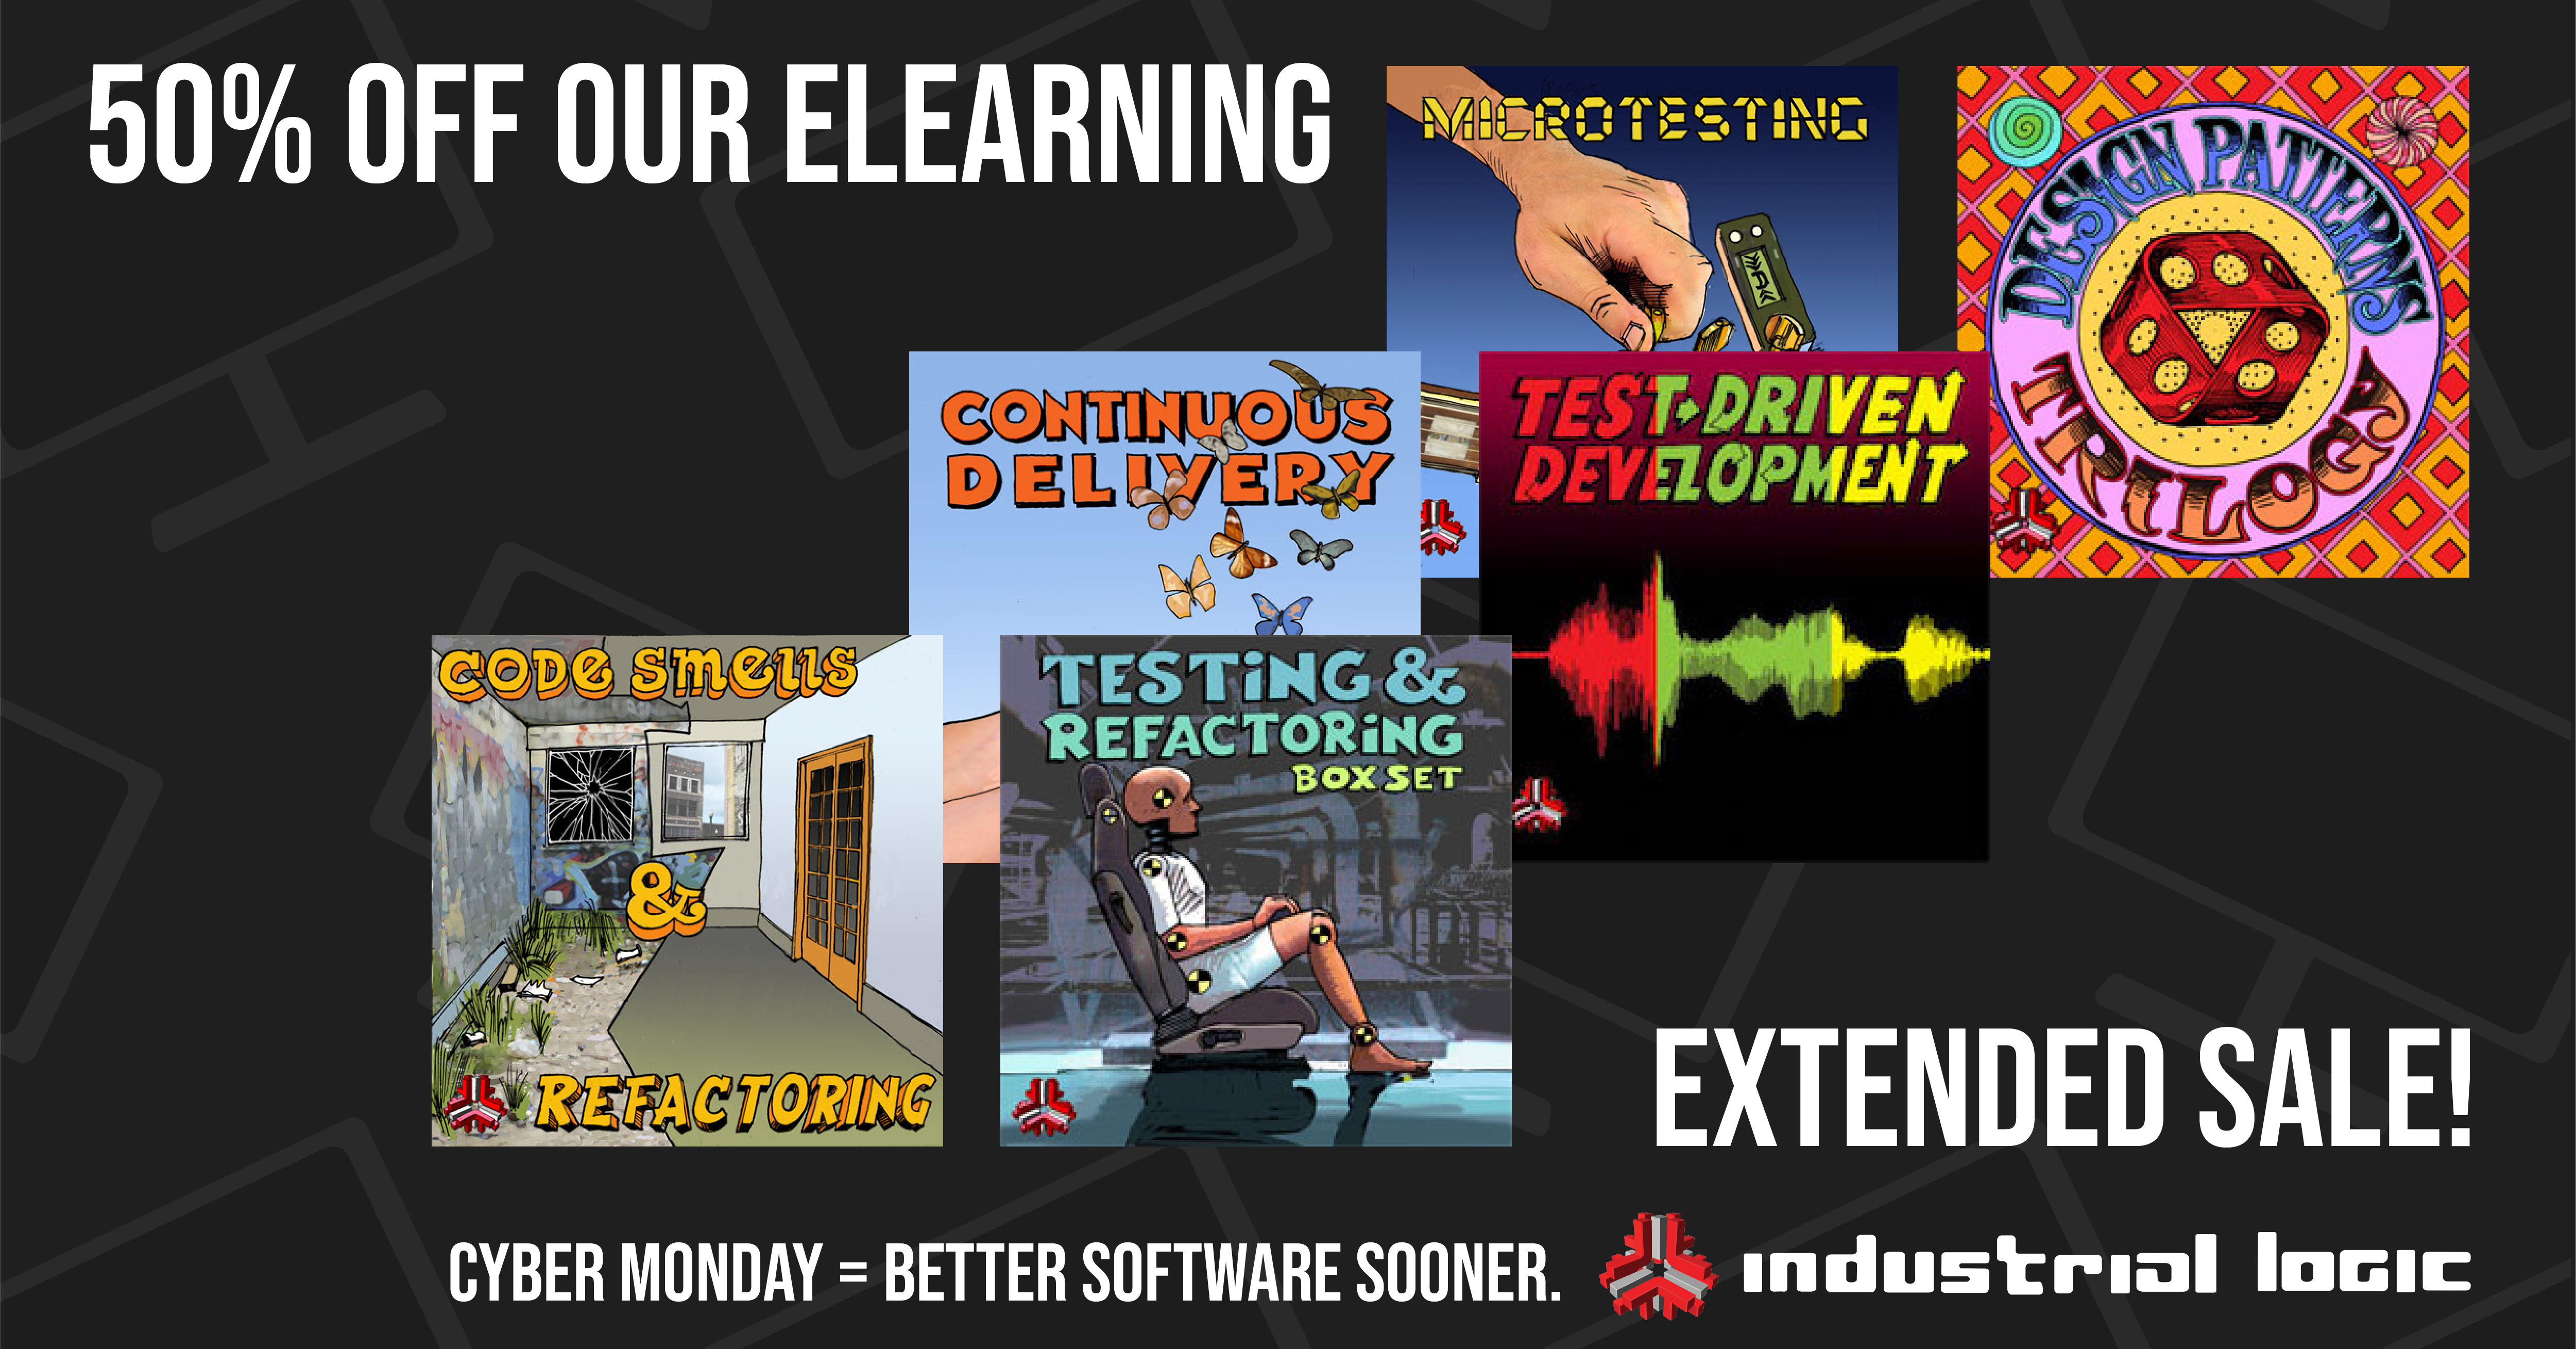 eLearning CyberMonday Sale Extended